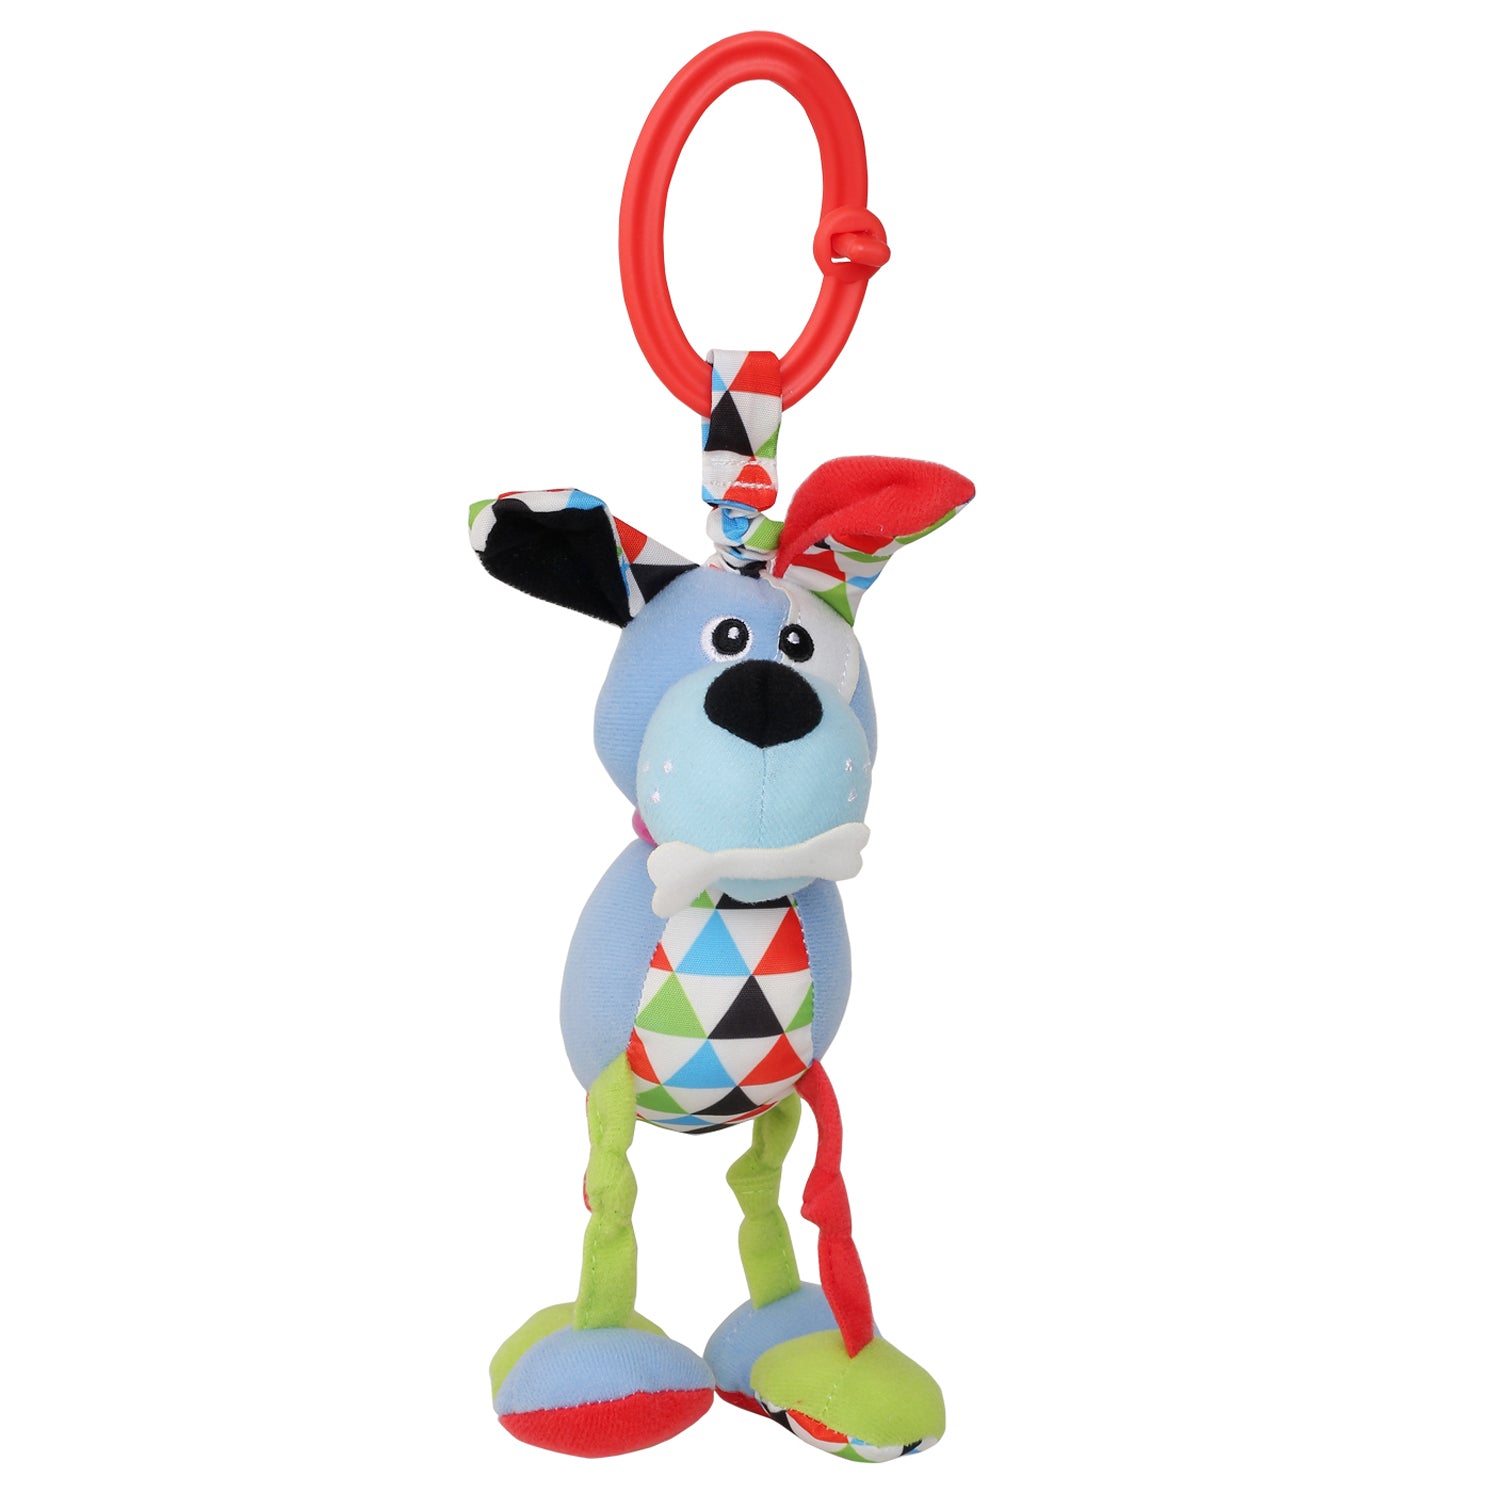 Baby Moo Puppy Blue Hanging Toy With Vibrations